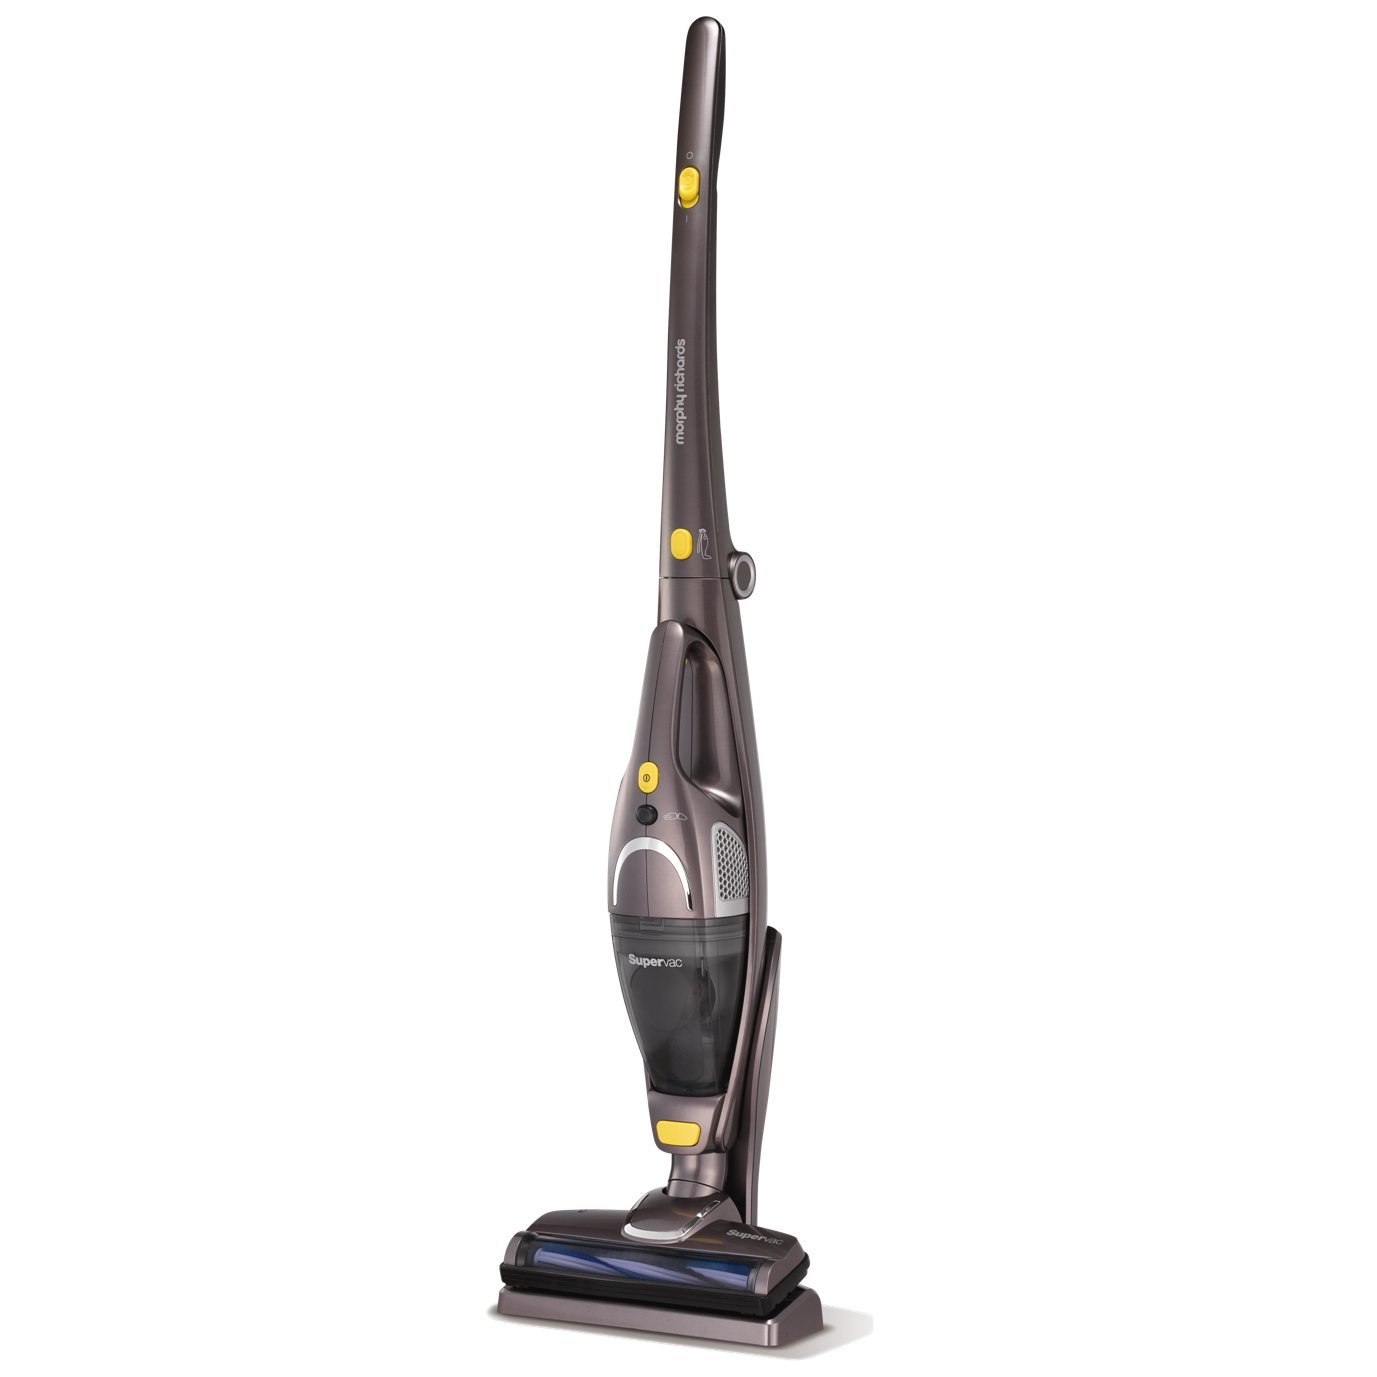 Morphy Richards 732000 2-In-1 Supervac Cordless Vacuum Cleaner – Grade A